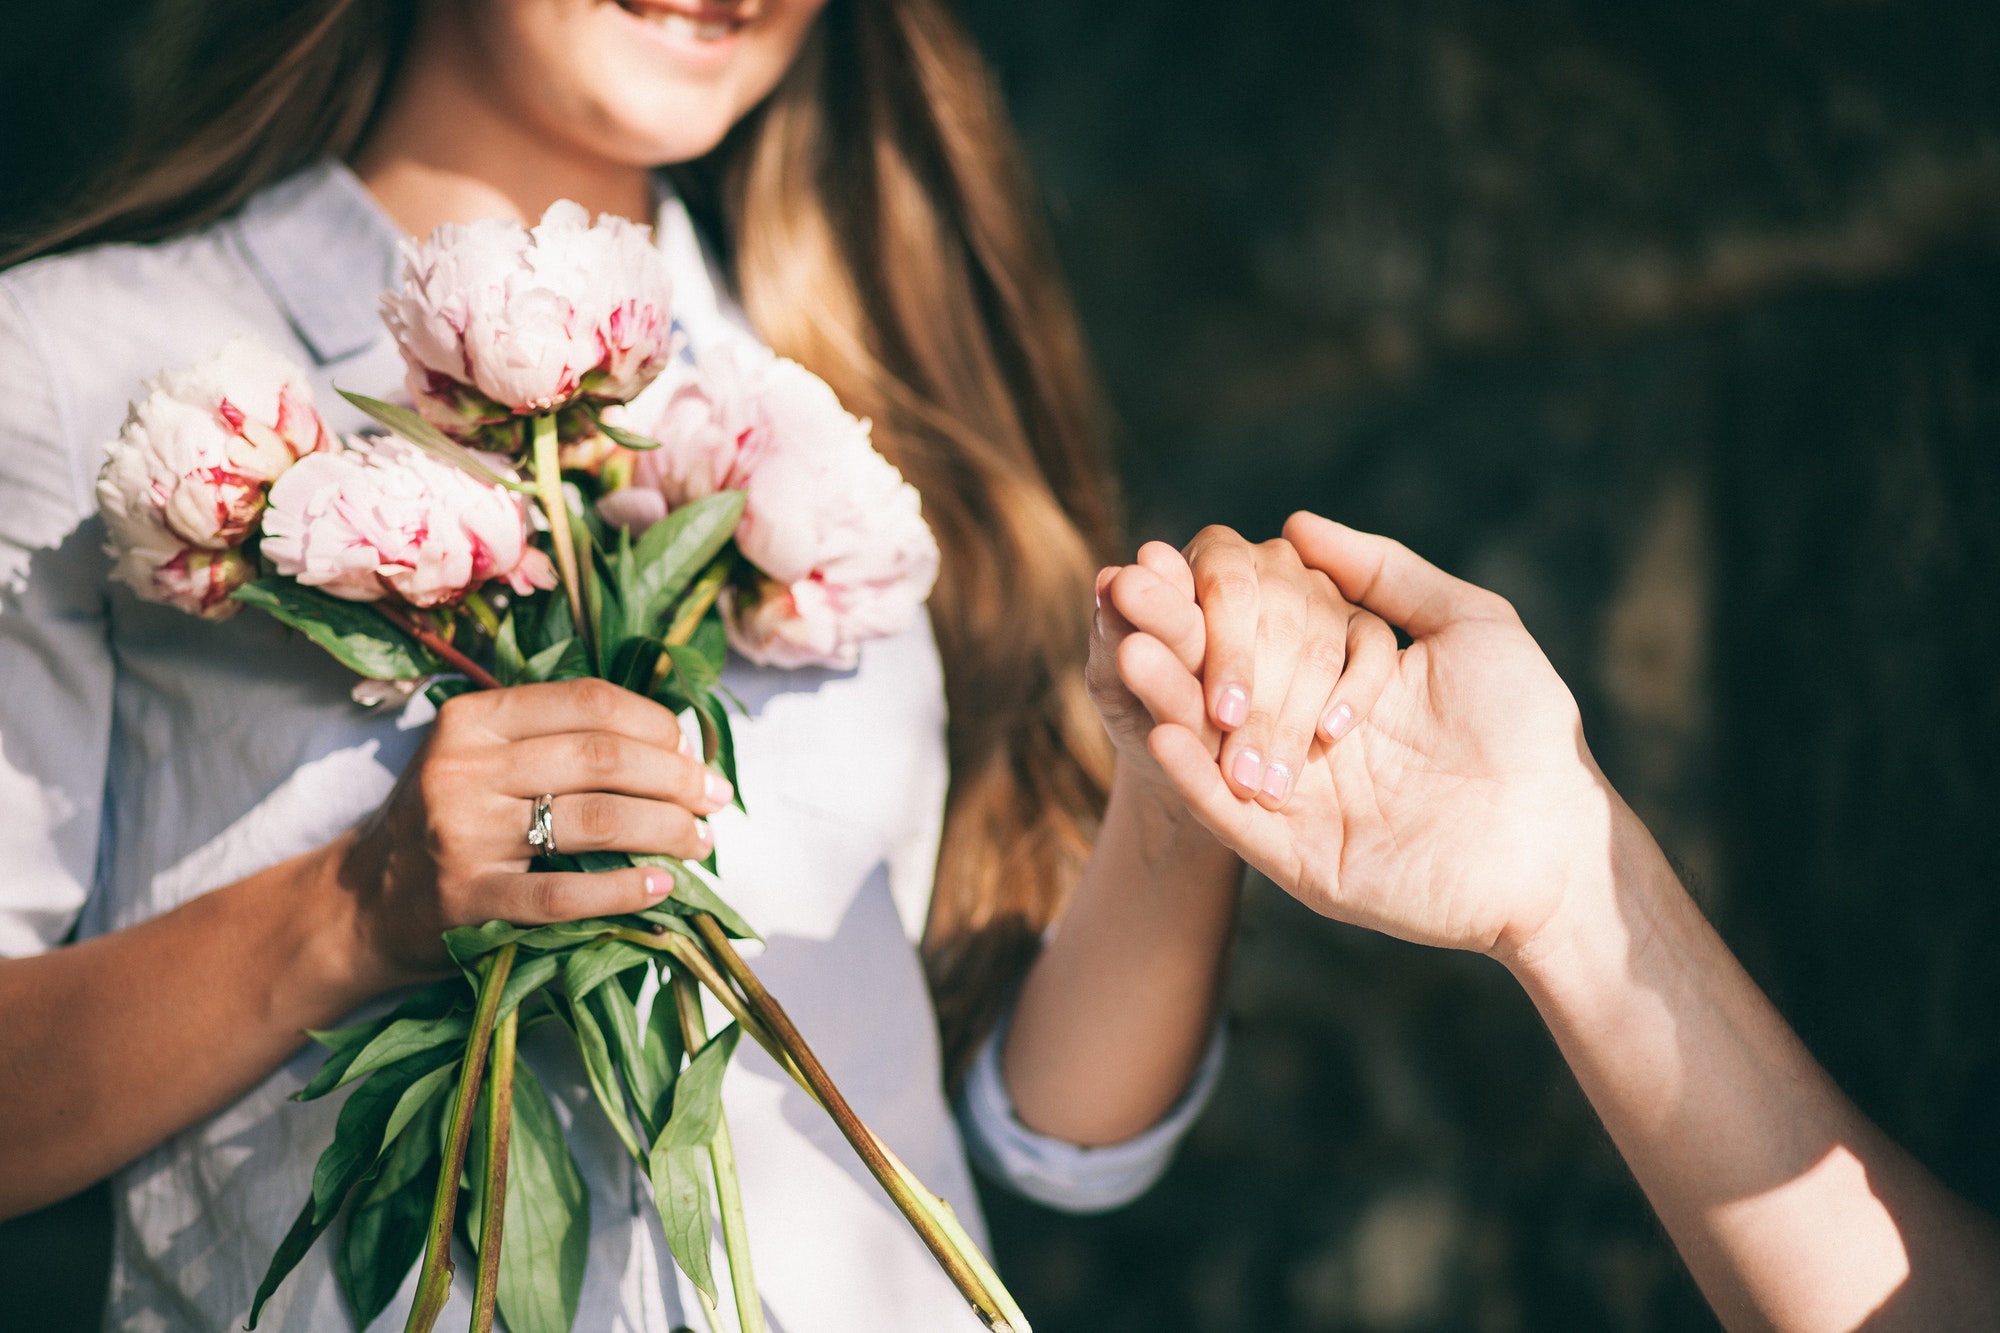 woman-with-engagement-ring-and-peony-bouquet.jpg